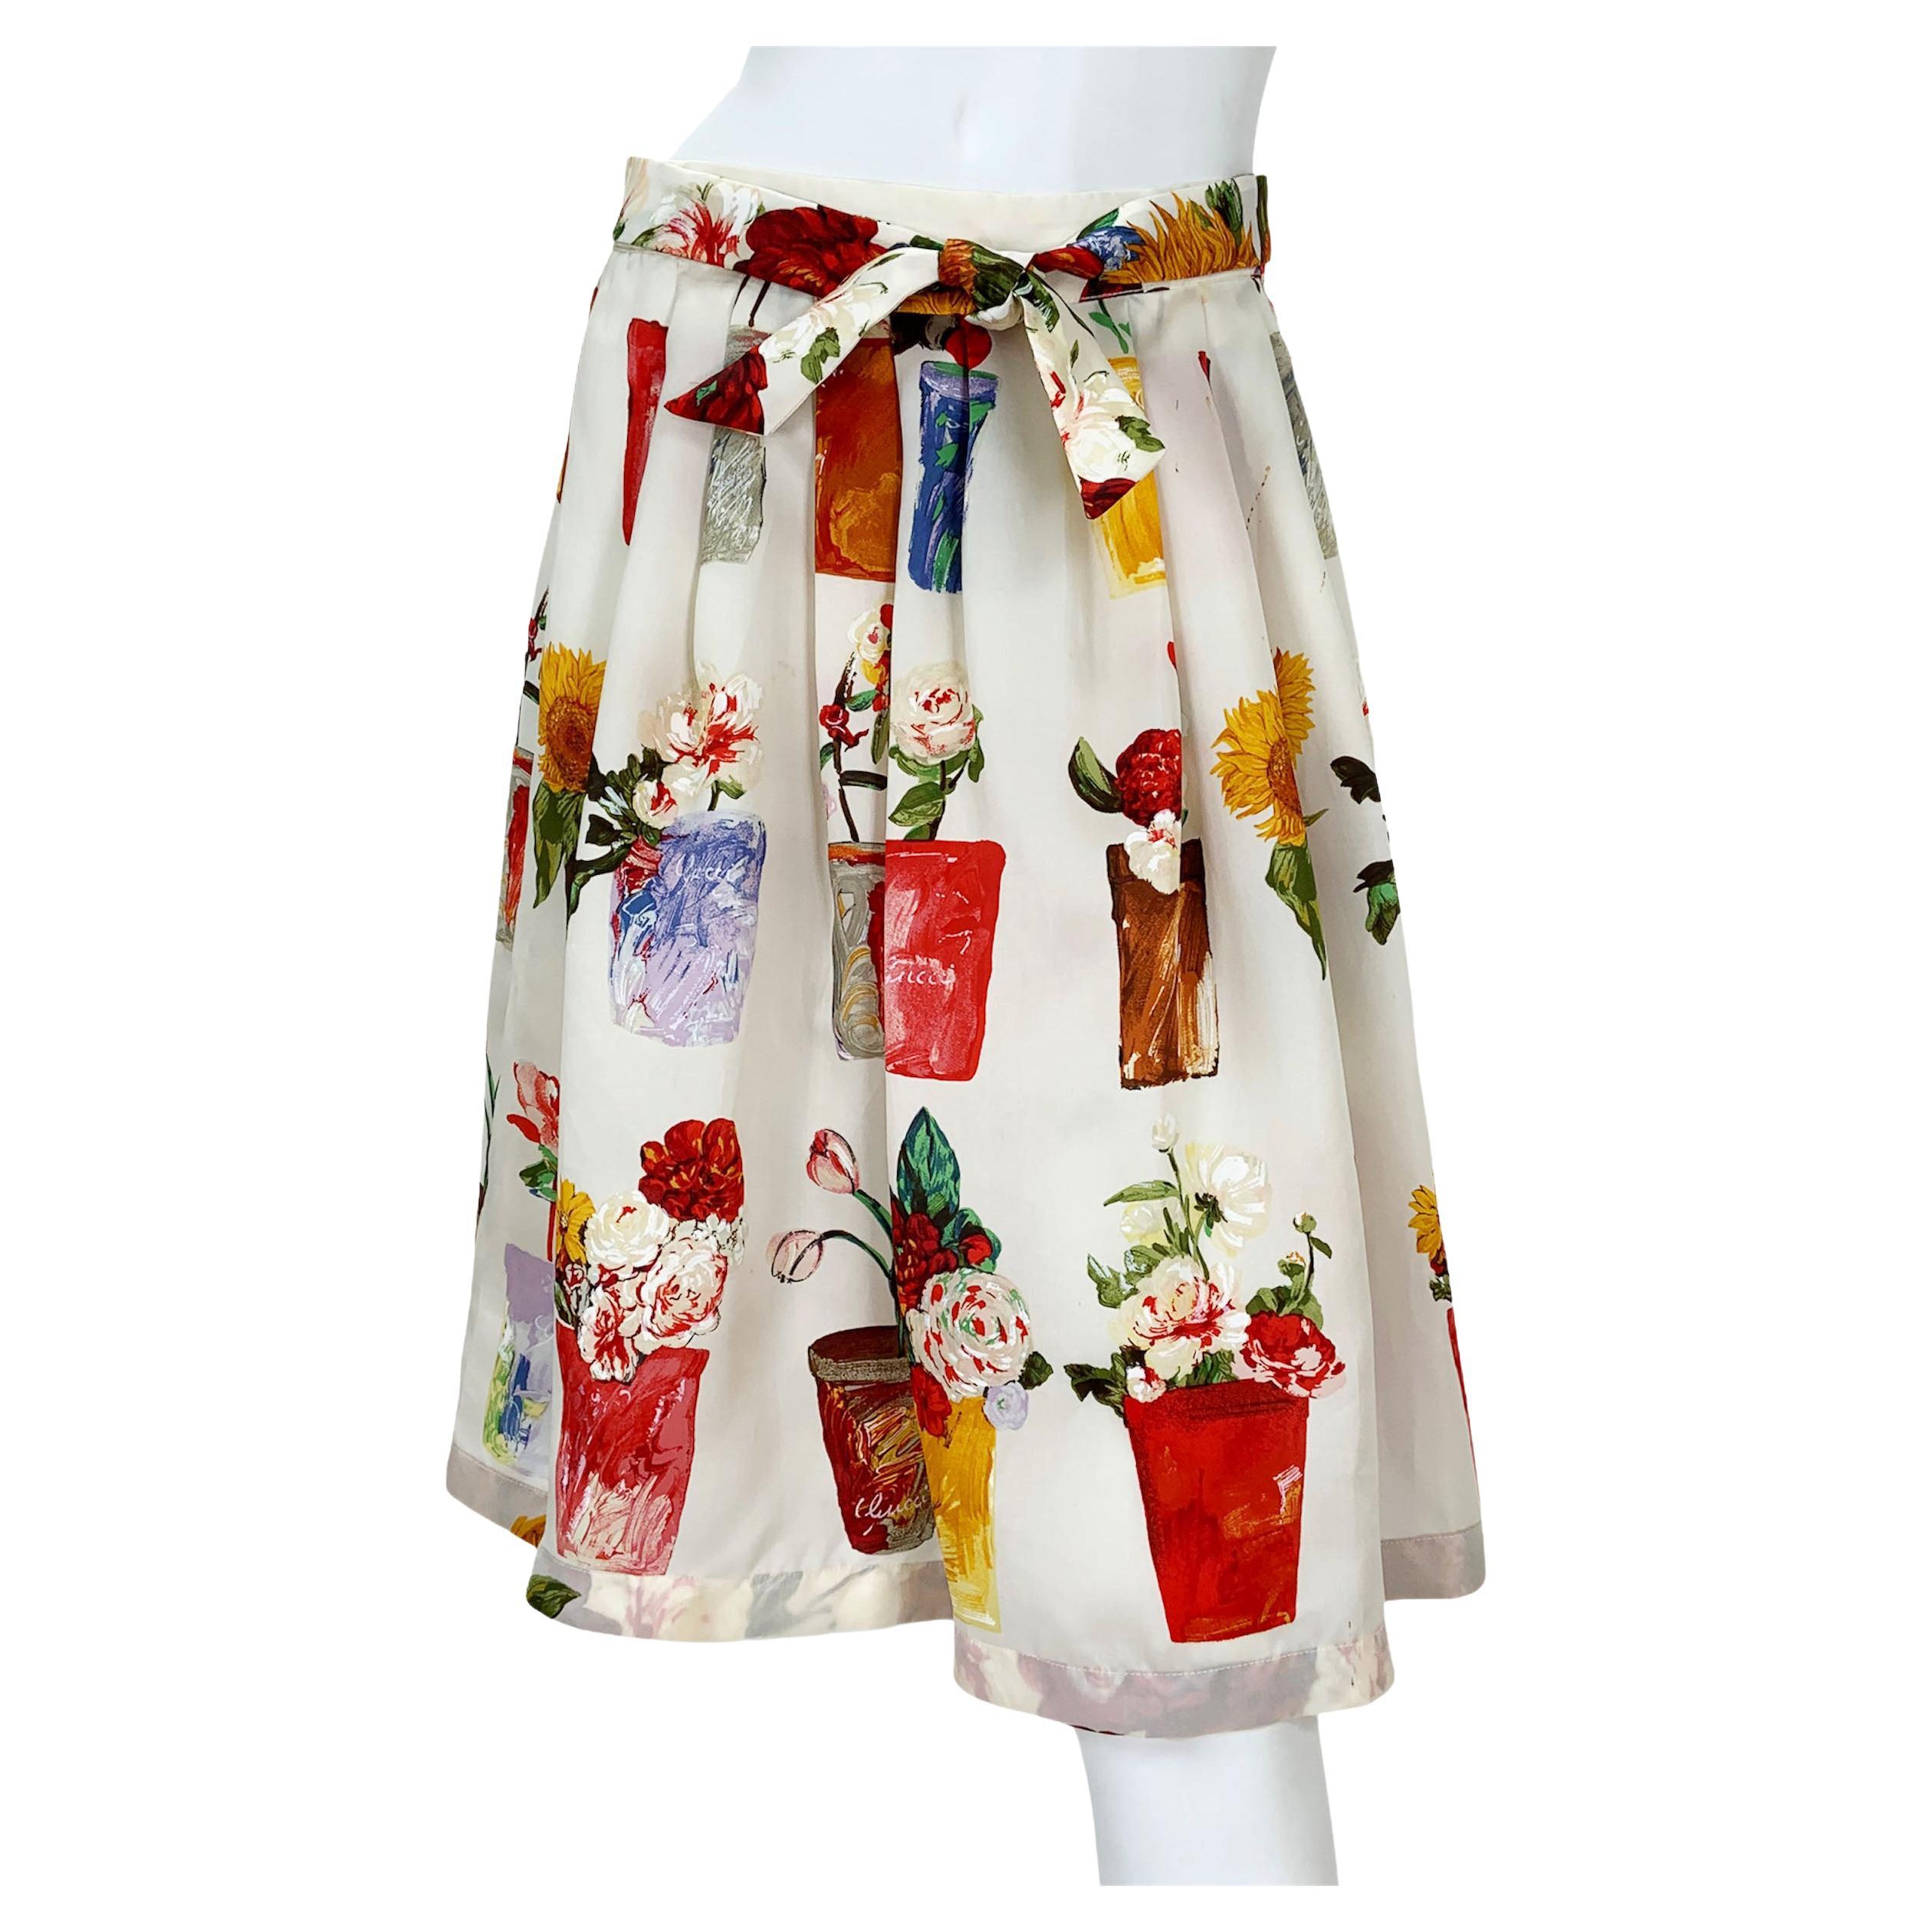 Tom Ford for Gucci S/S 1995 Silk Organza Flowerpot Pleated Skirt Italian 46  For Sale